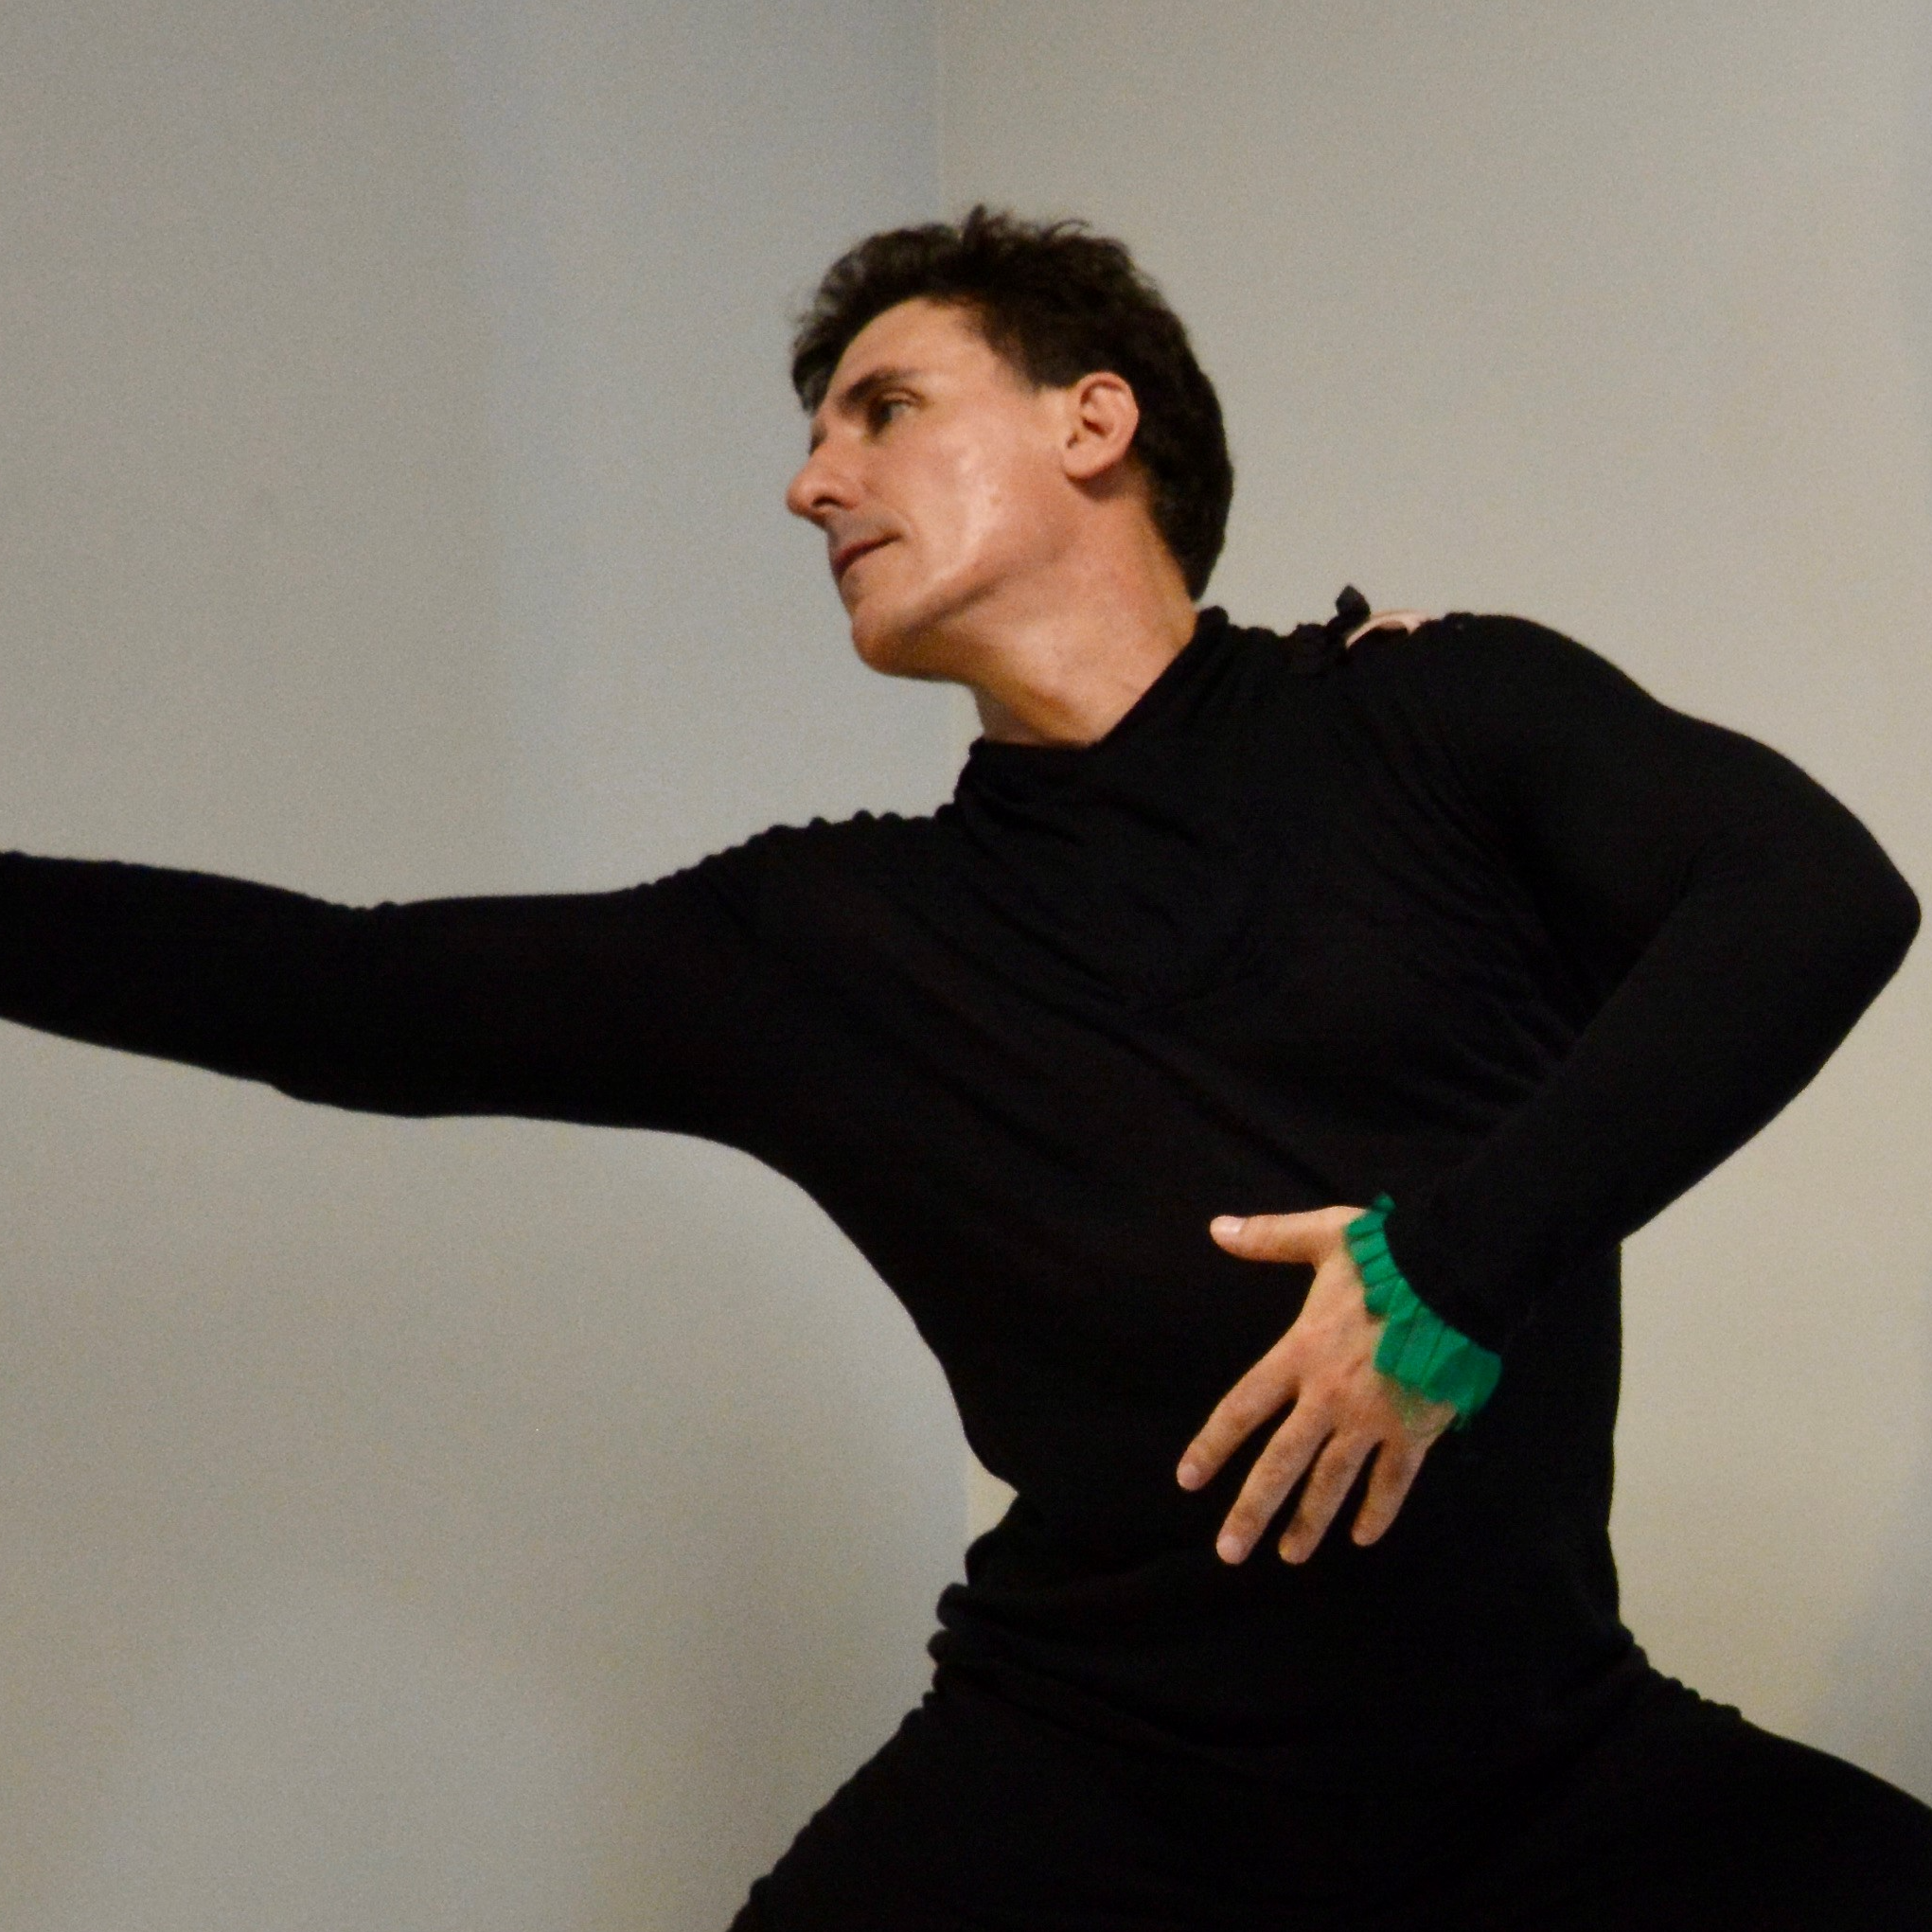 Choreography workshop to apply classical music to contemporary flamenco dance